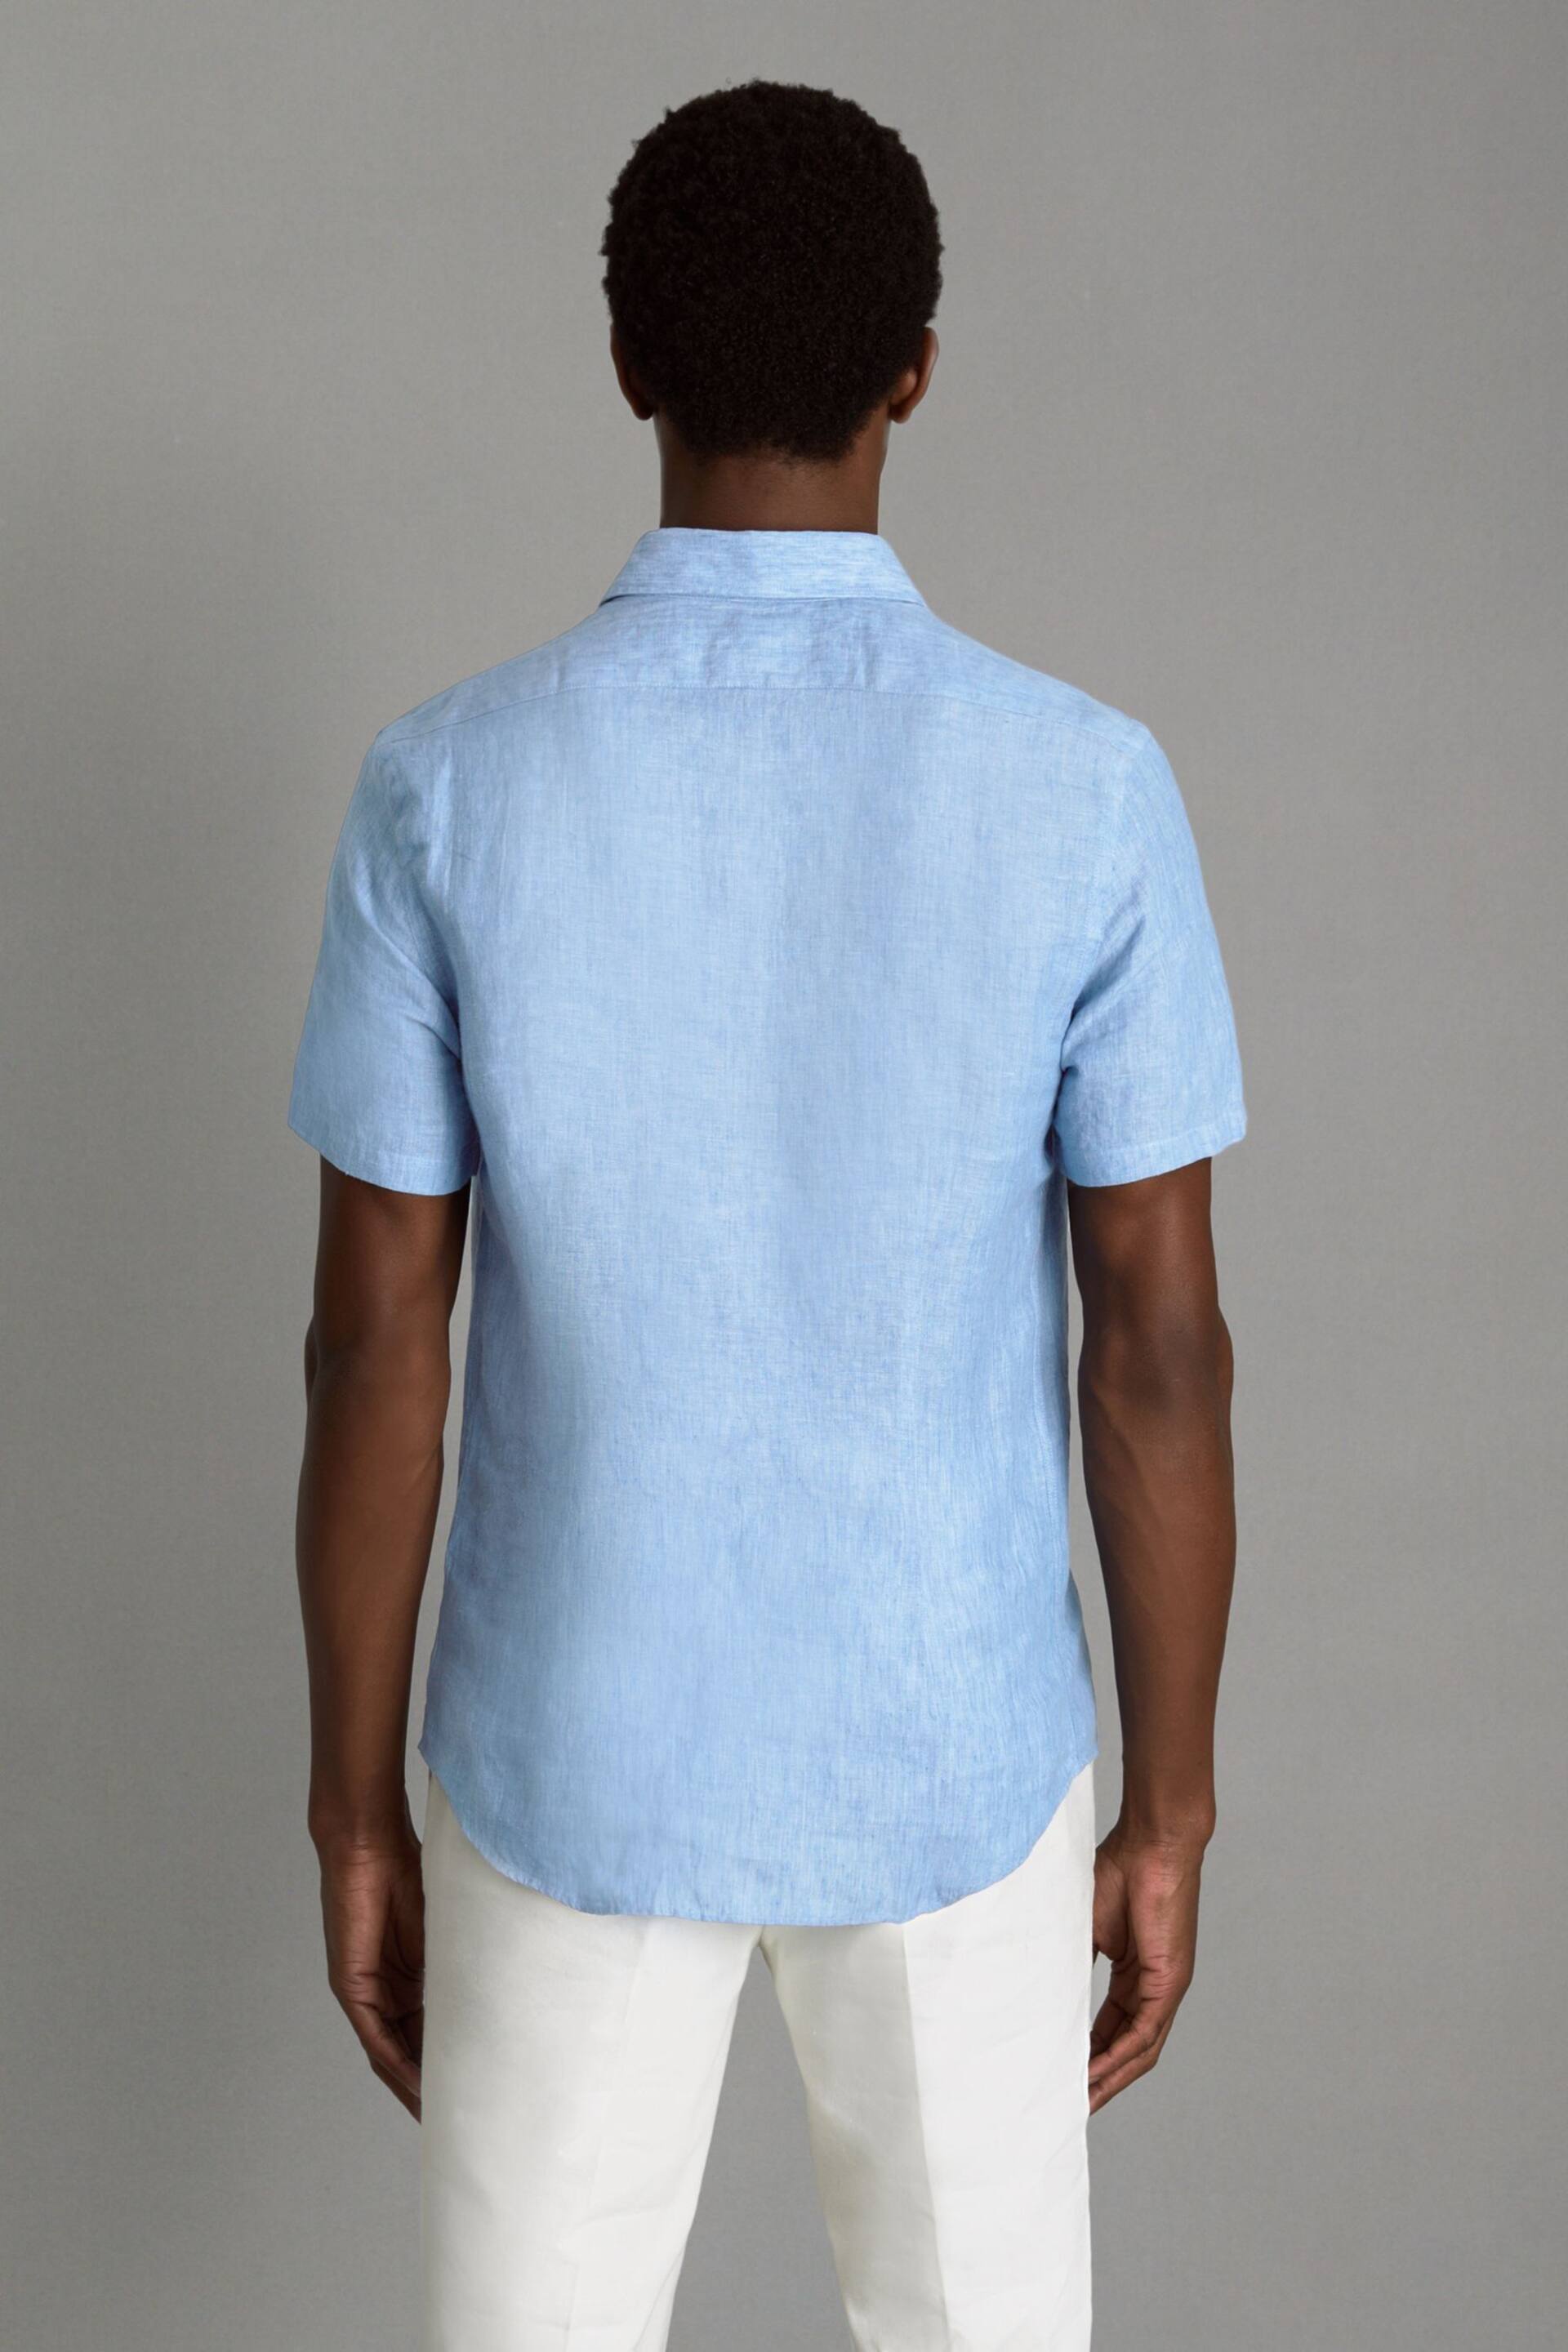 Reiss Sky Blue Holiday Slim Fit Linen Shirt - Image 5 of 6